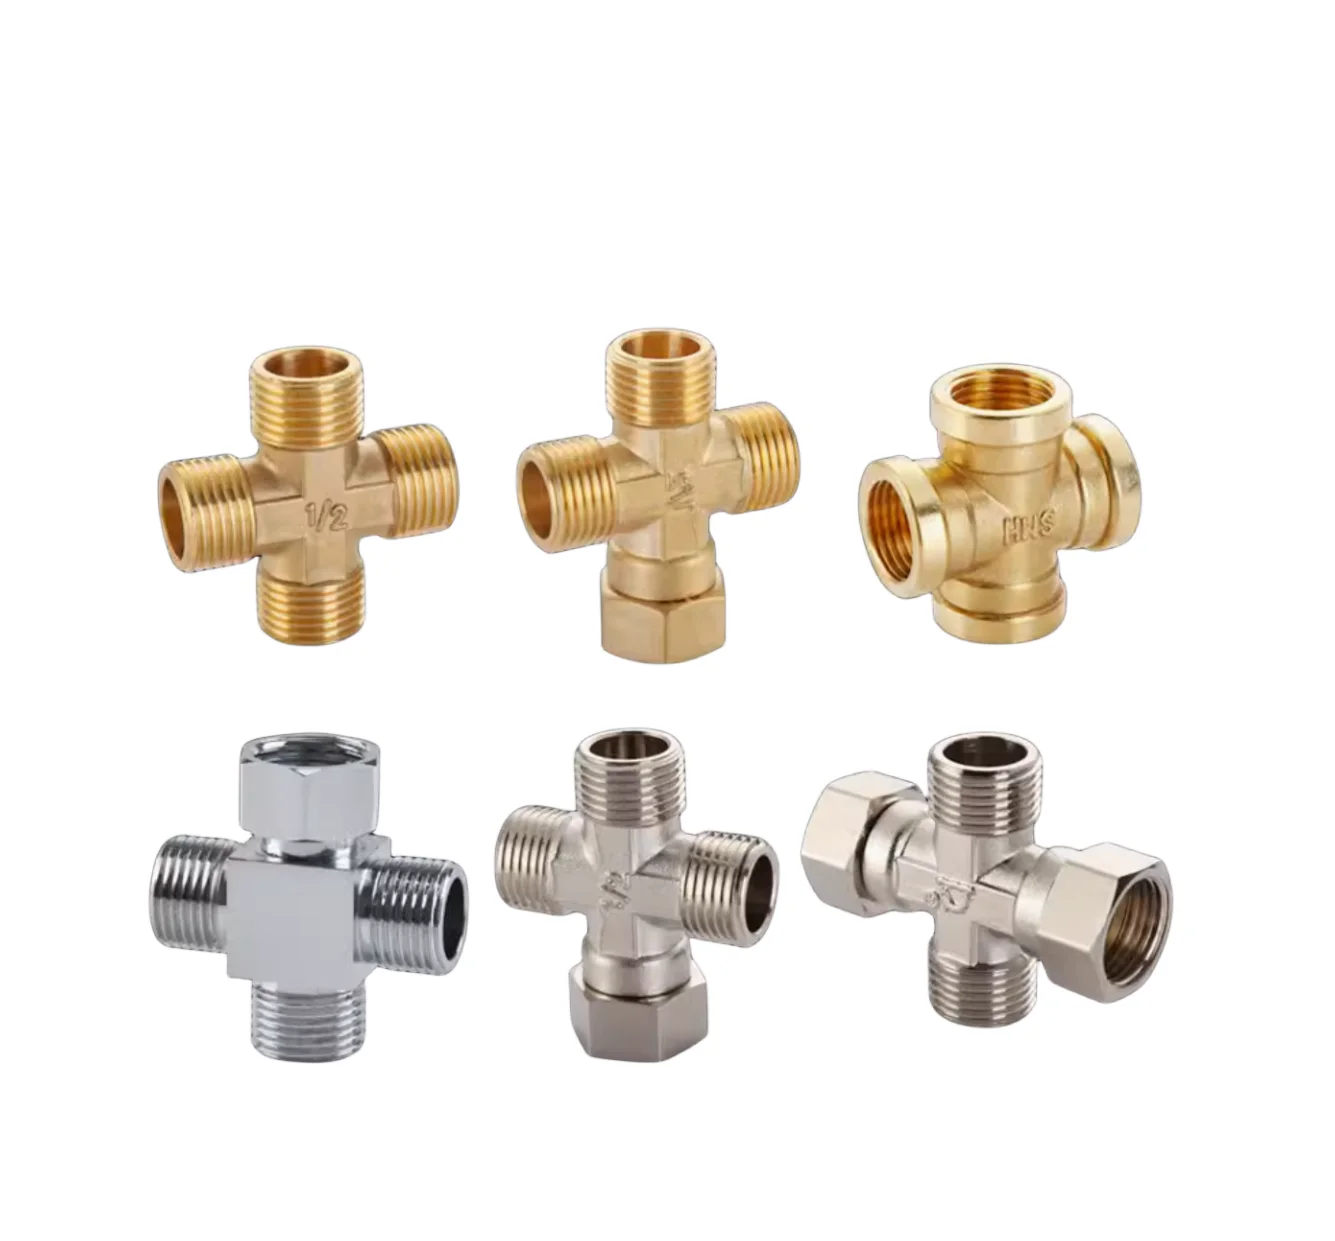 

All Copper Four Way Joint Cross Water Pipe Three Way Water Distributor DN15 Copper Pipe Fittings gas Joint